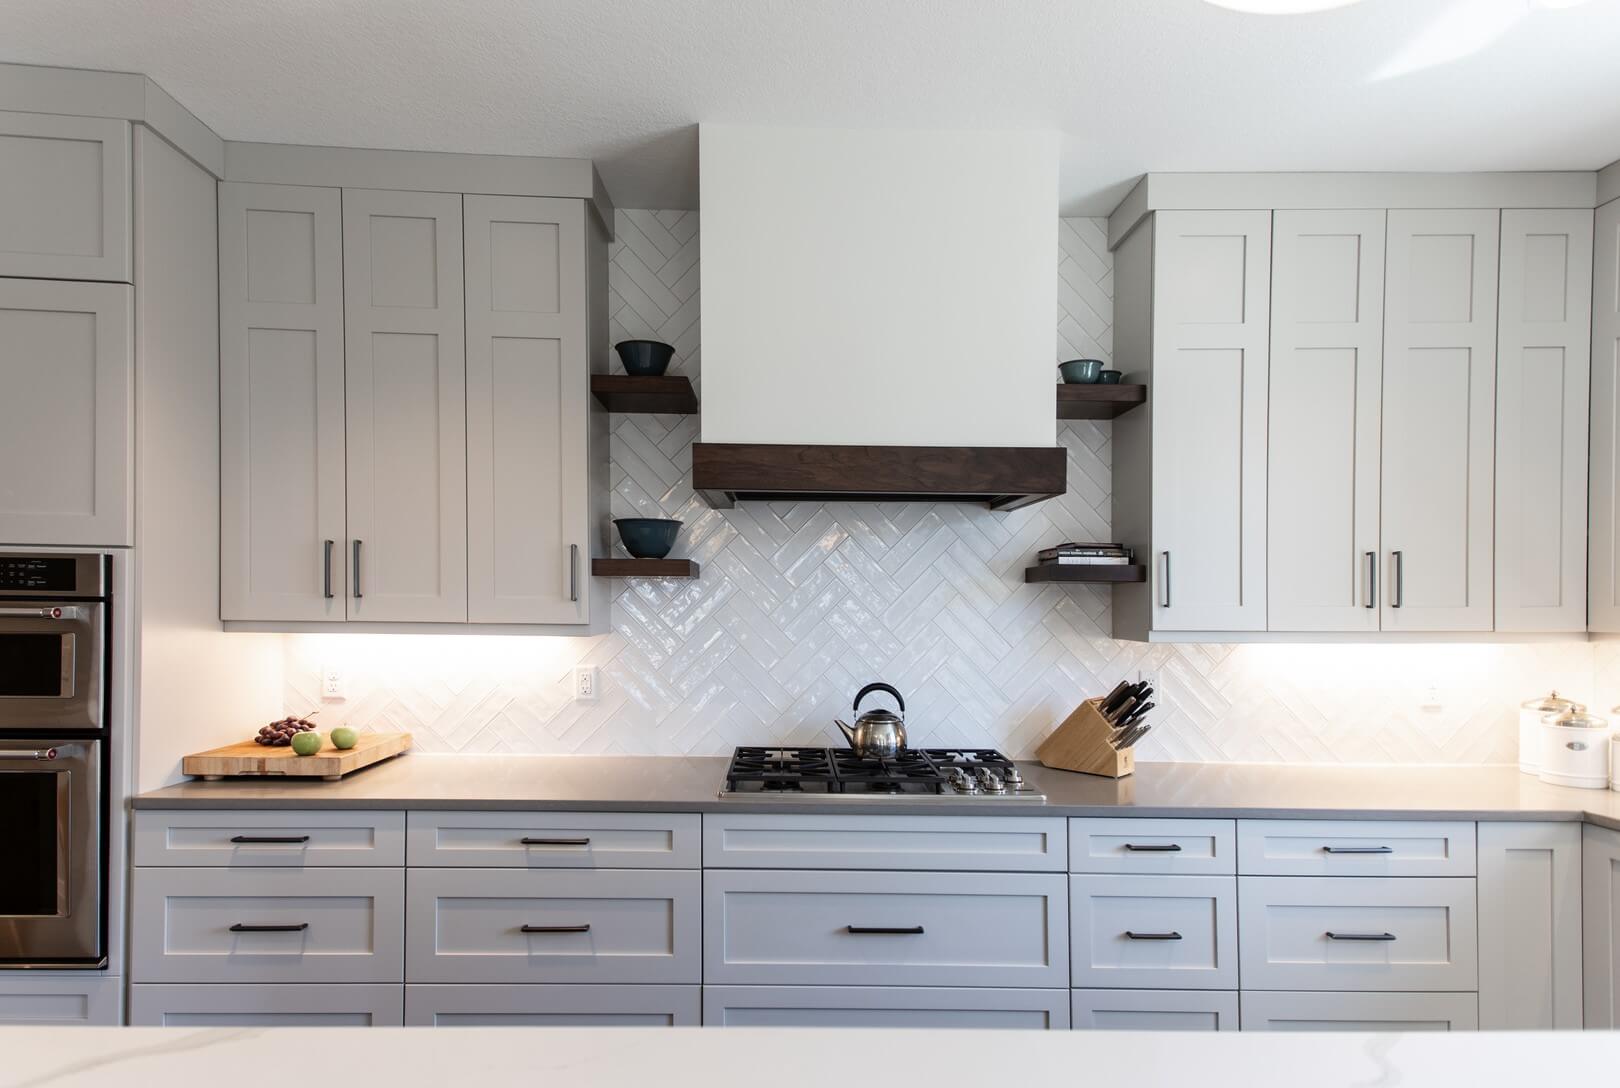 Kitchen Cabinets, Backsplash and Counter by J. Curry Interiors